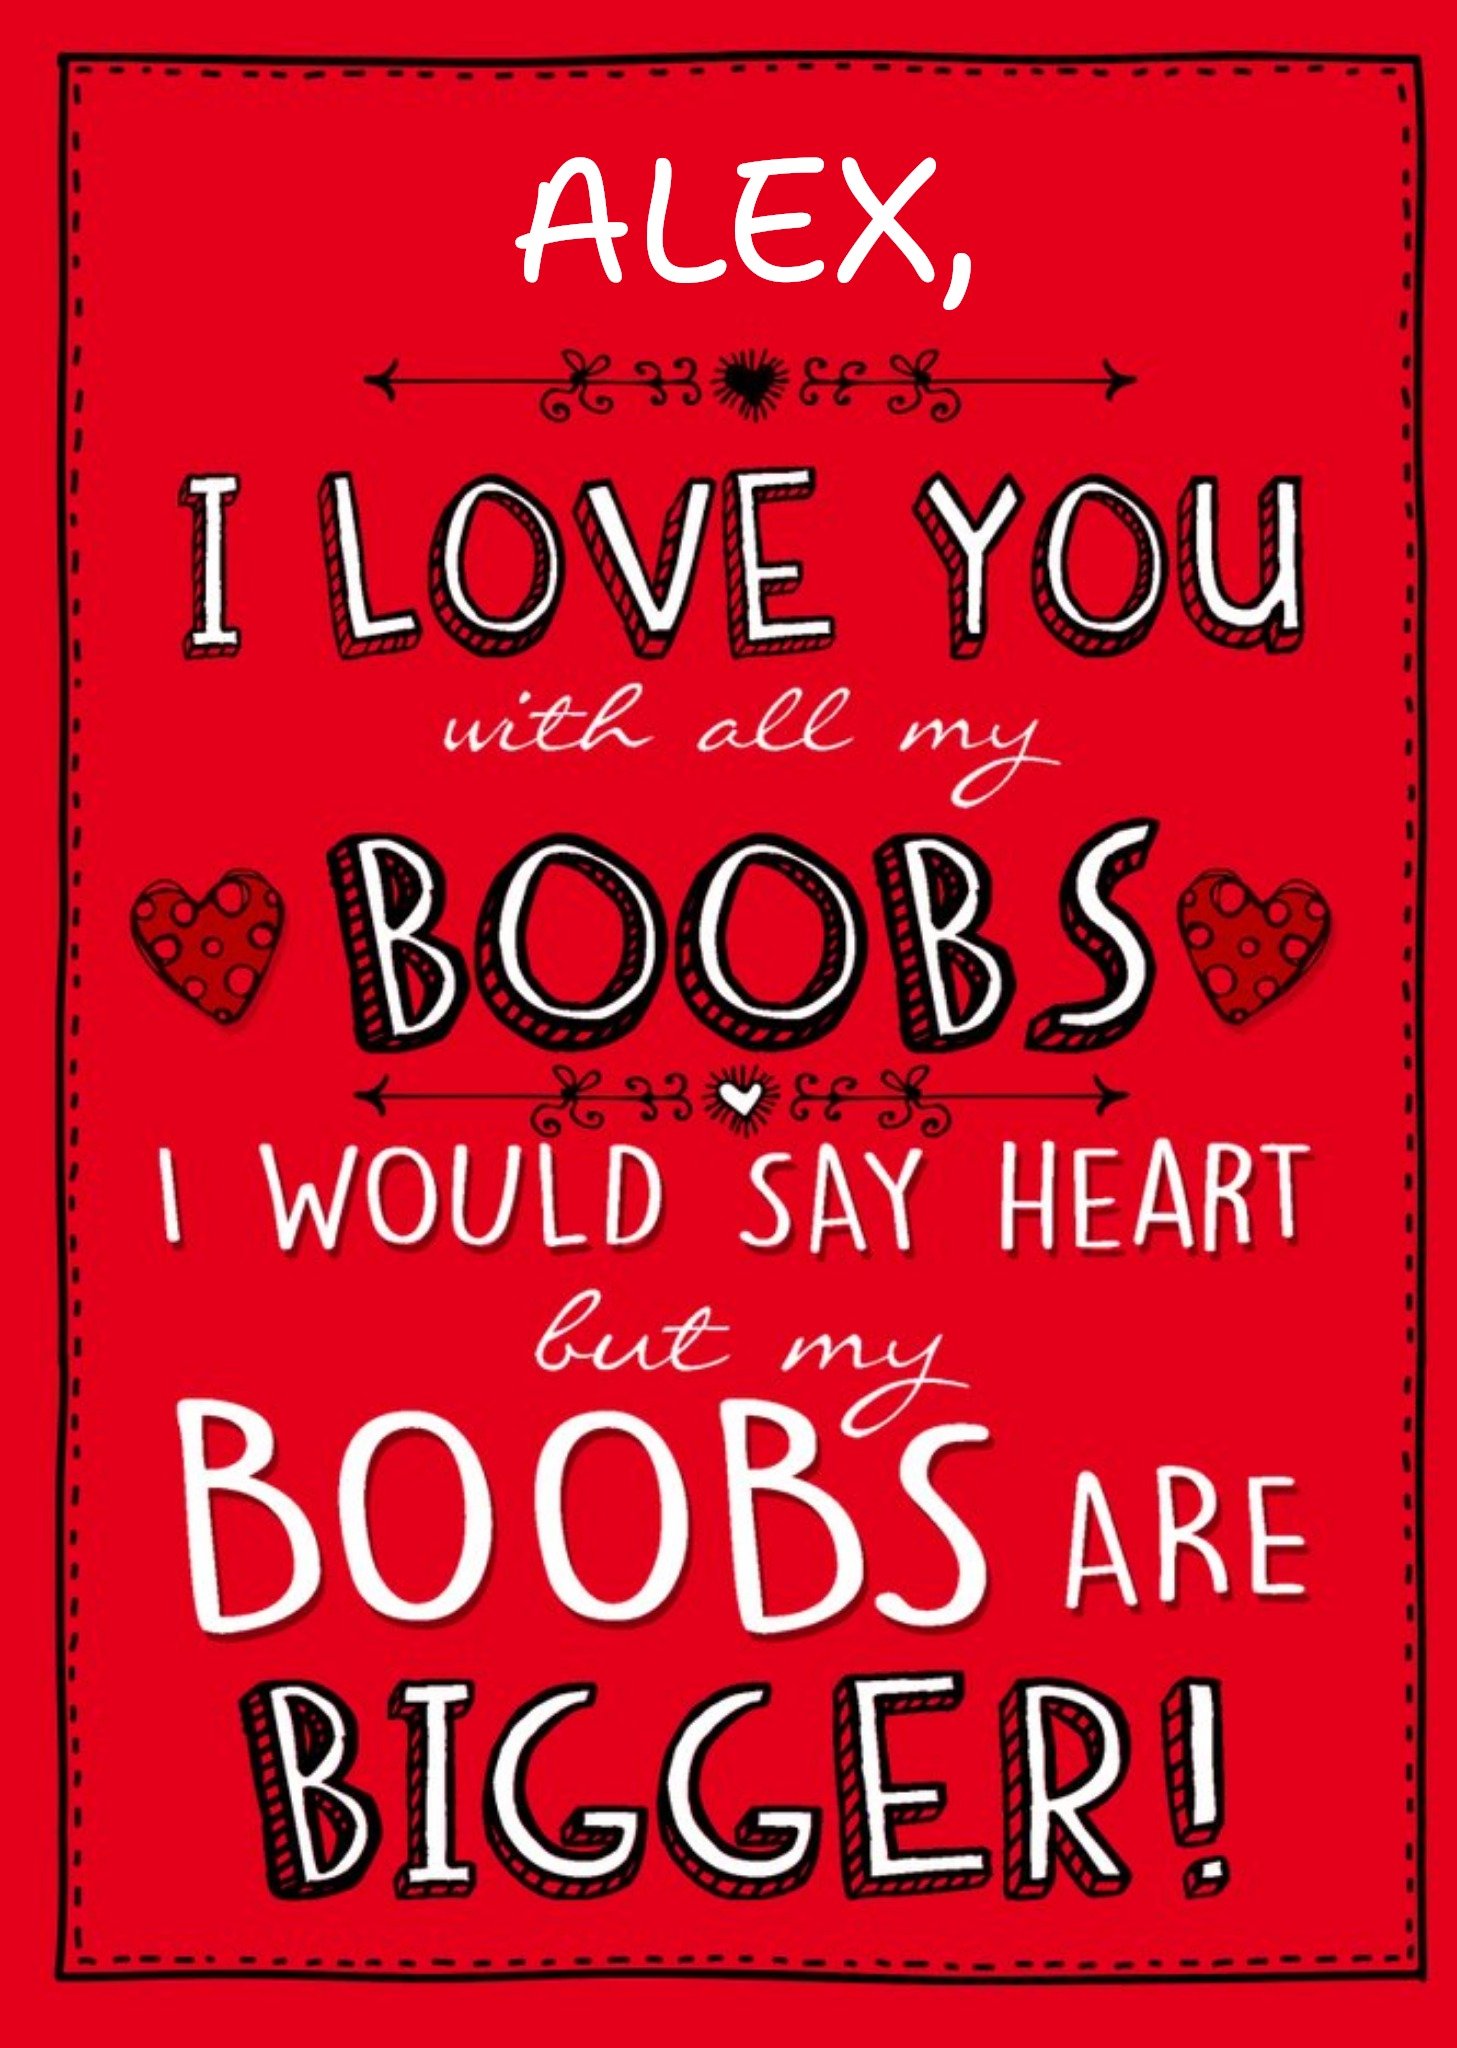 Moonpig Personalised Text Humourous I Love You Card, Large